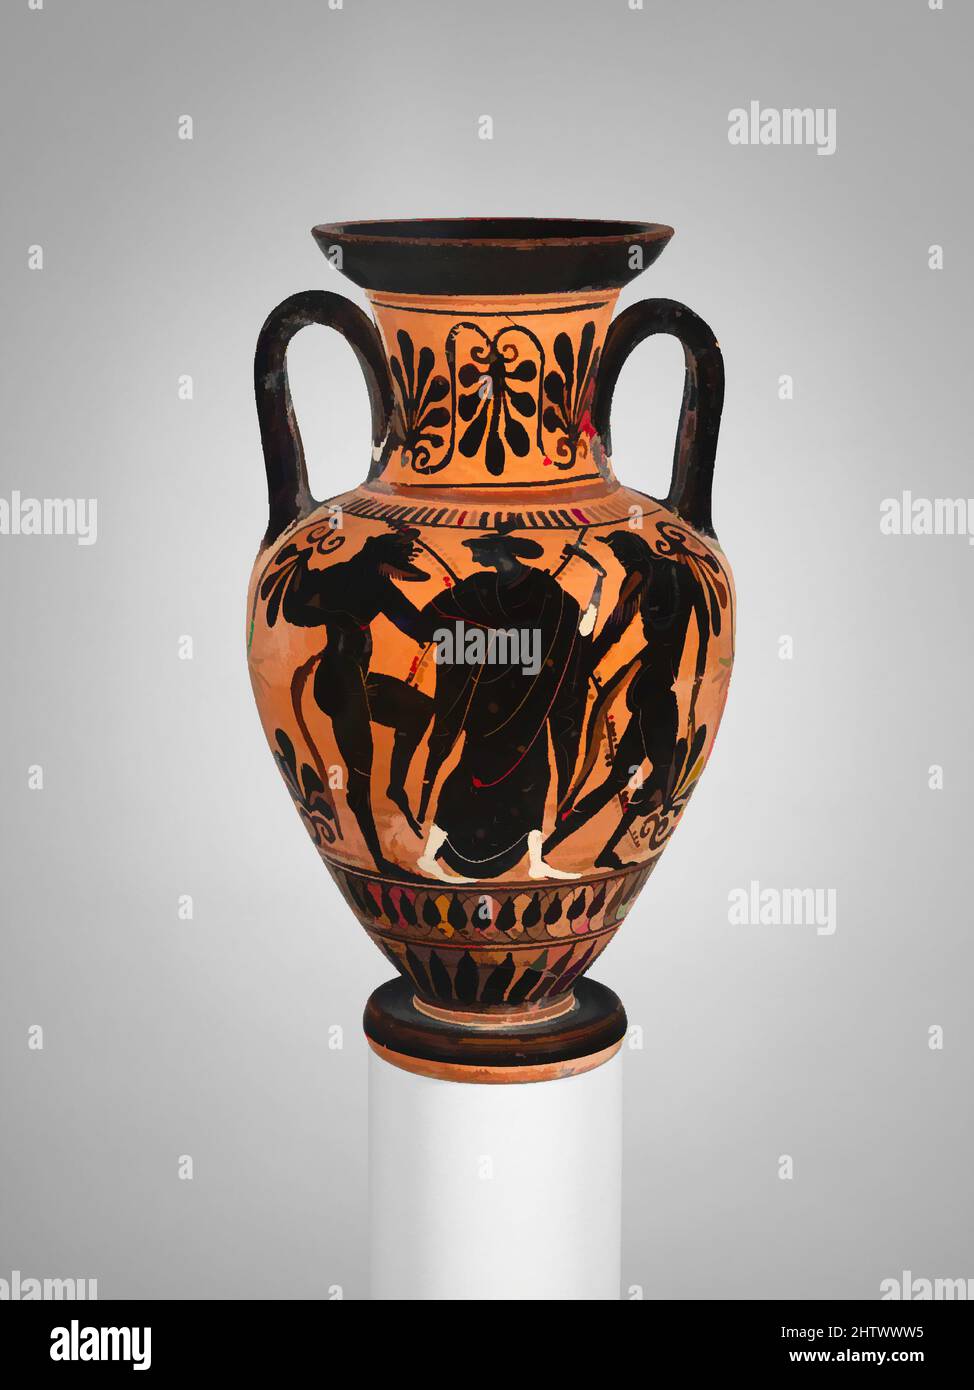 Art inspired by Neck-amphora, Archaic, ca. 500 B.C., Greek, Attic, Terracotta; black-figure, Diameter: 6 3/8 × 4 11/16 × 3 1/2 in. (16.2 × 11.9 × 9 cm), Vases, Classic works modernized by Artotop with a splash of modernity. Shapes, color and value, eye-catching visual impact on art. Emotions through freedom of artworks in a contemporary way. A timeless message pursuing a wildly creative new direction. Artists turning to the digital medium and creating the Artotop NFT Stock Photo